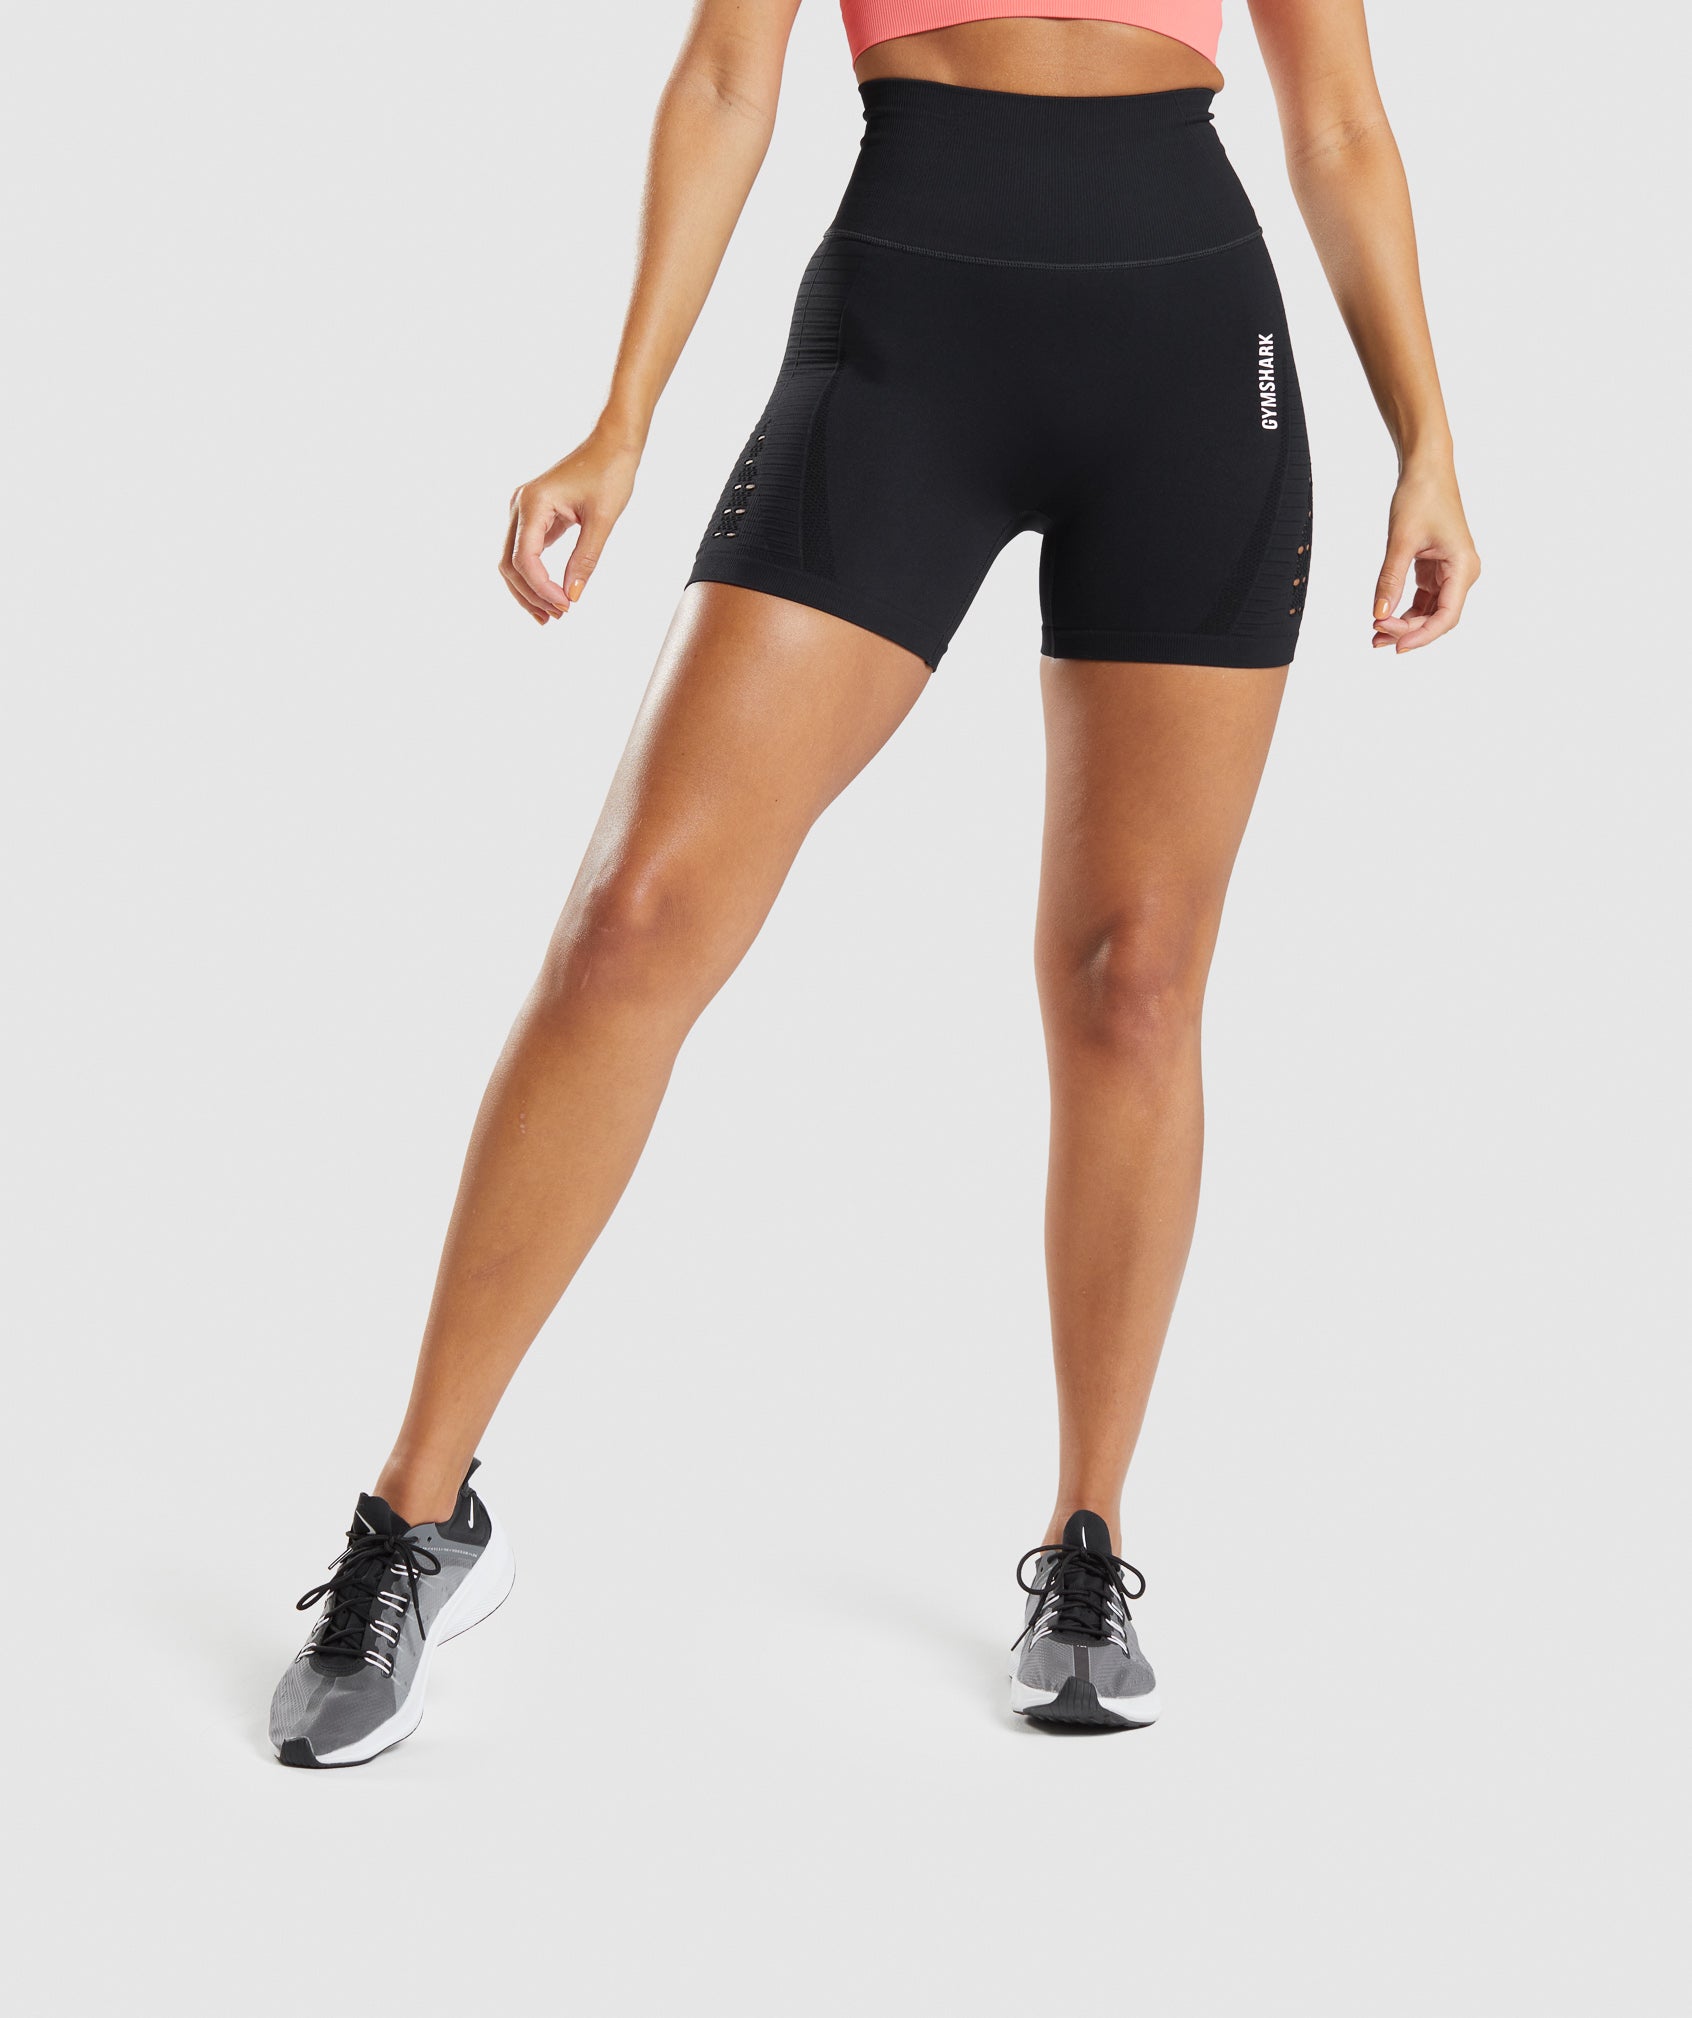 Energy Seamless Shorts in Black